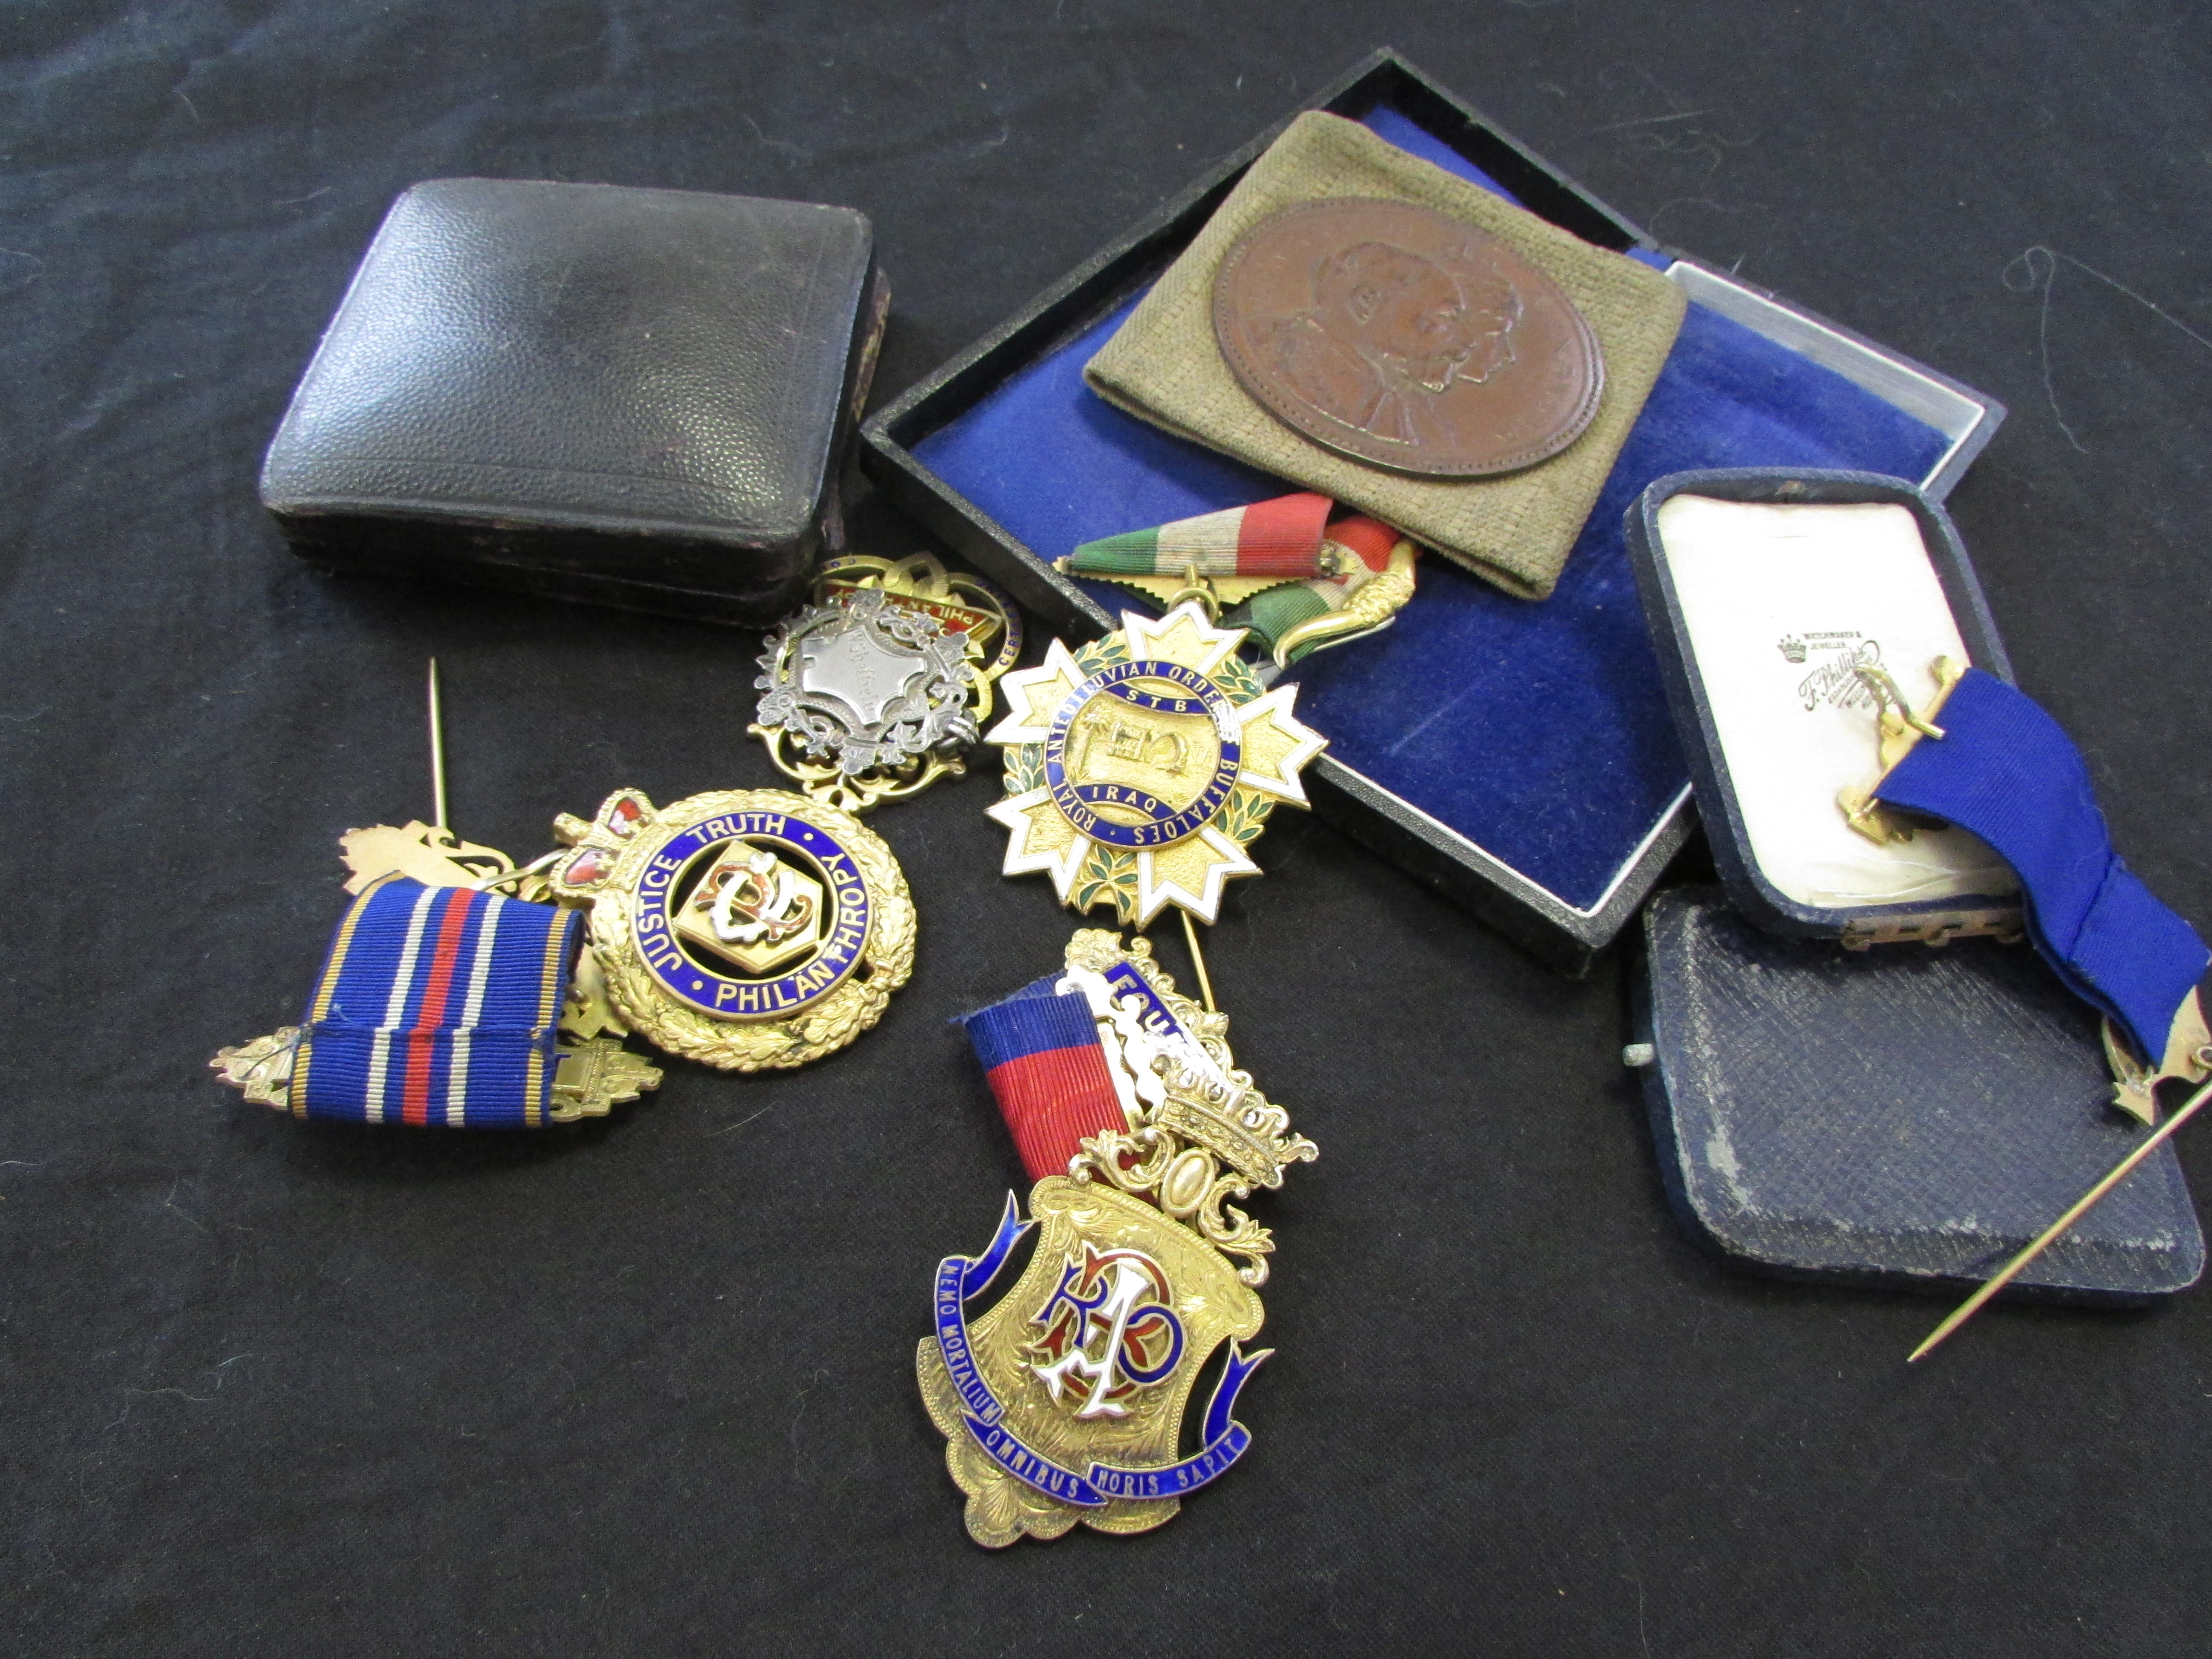 Masonic medals 4 of including one relating to Ipswich.